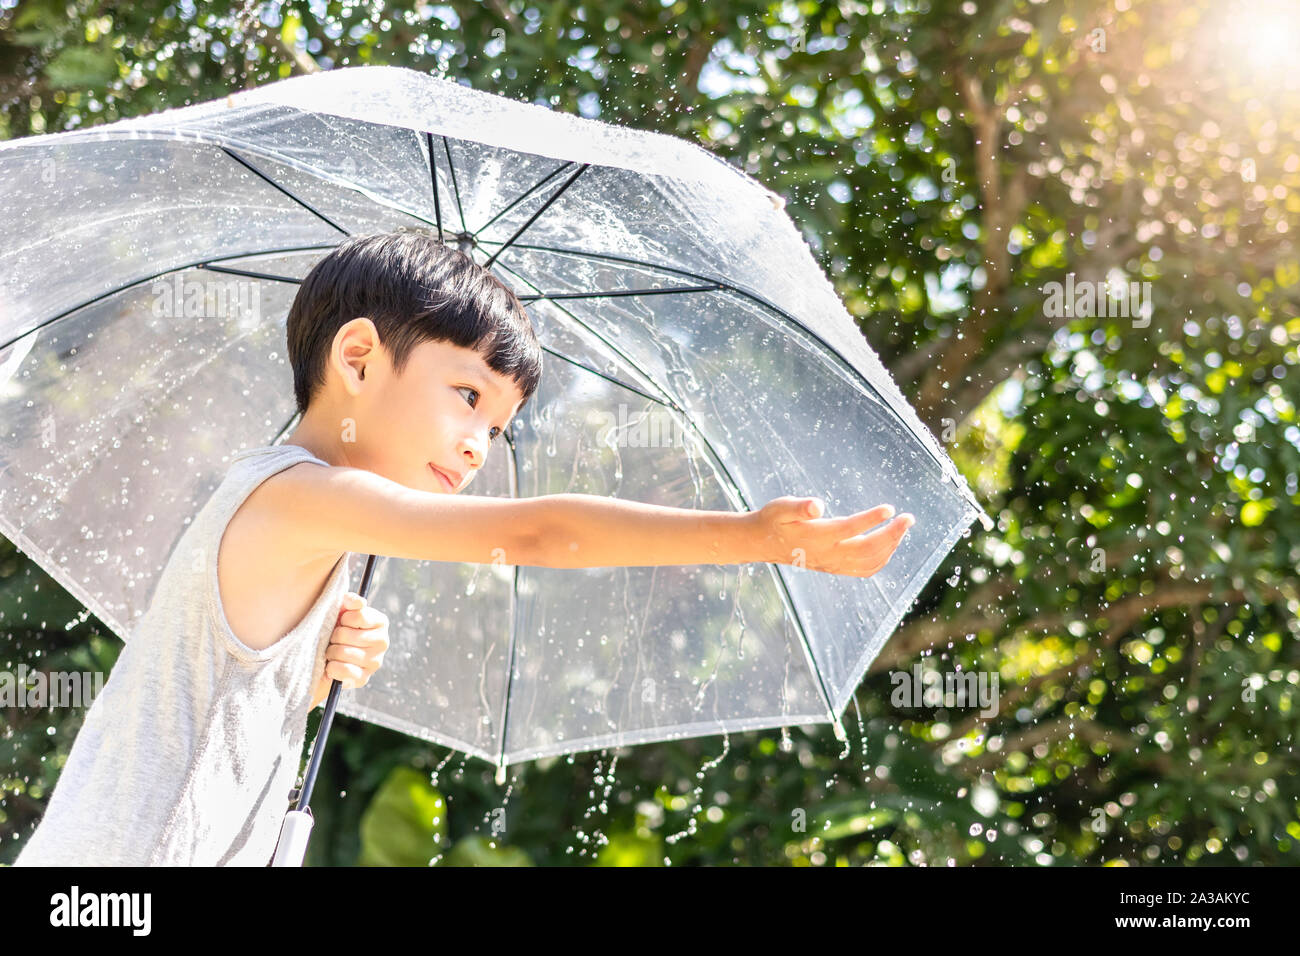 Kid hand holding umbrella playing on the nature outdoors. Little boy hiding under an umbrella. happy kid catching rain drops. Happy funny child  enjoy Stock Photo